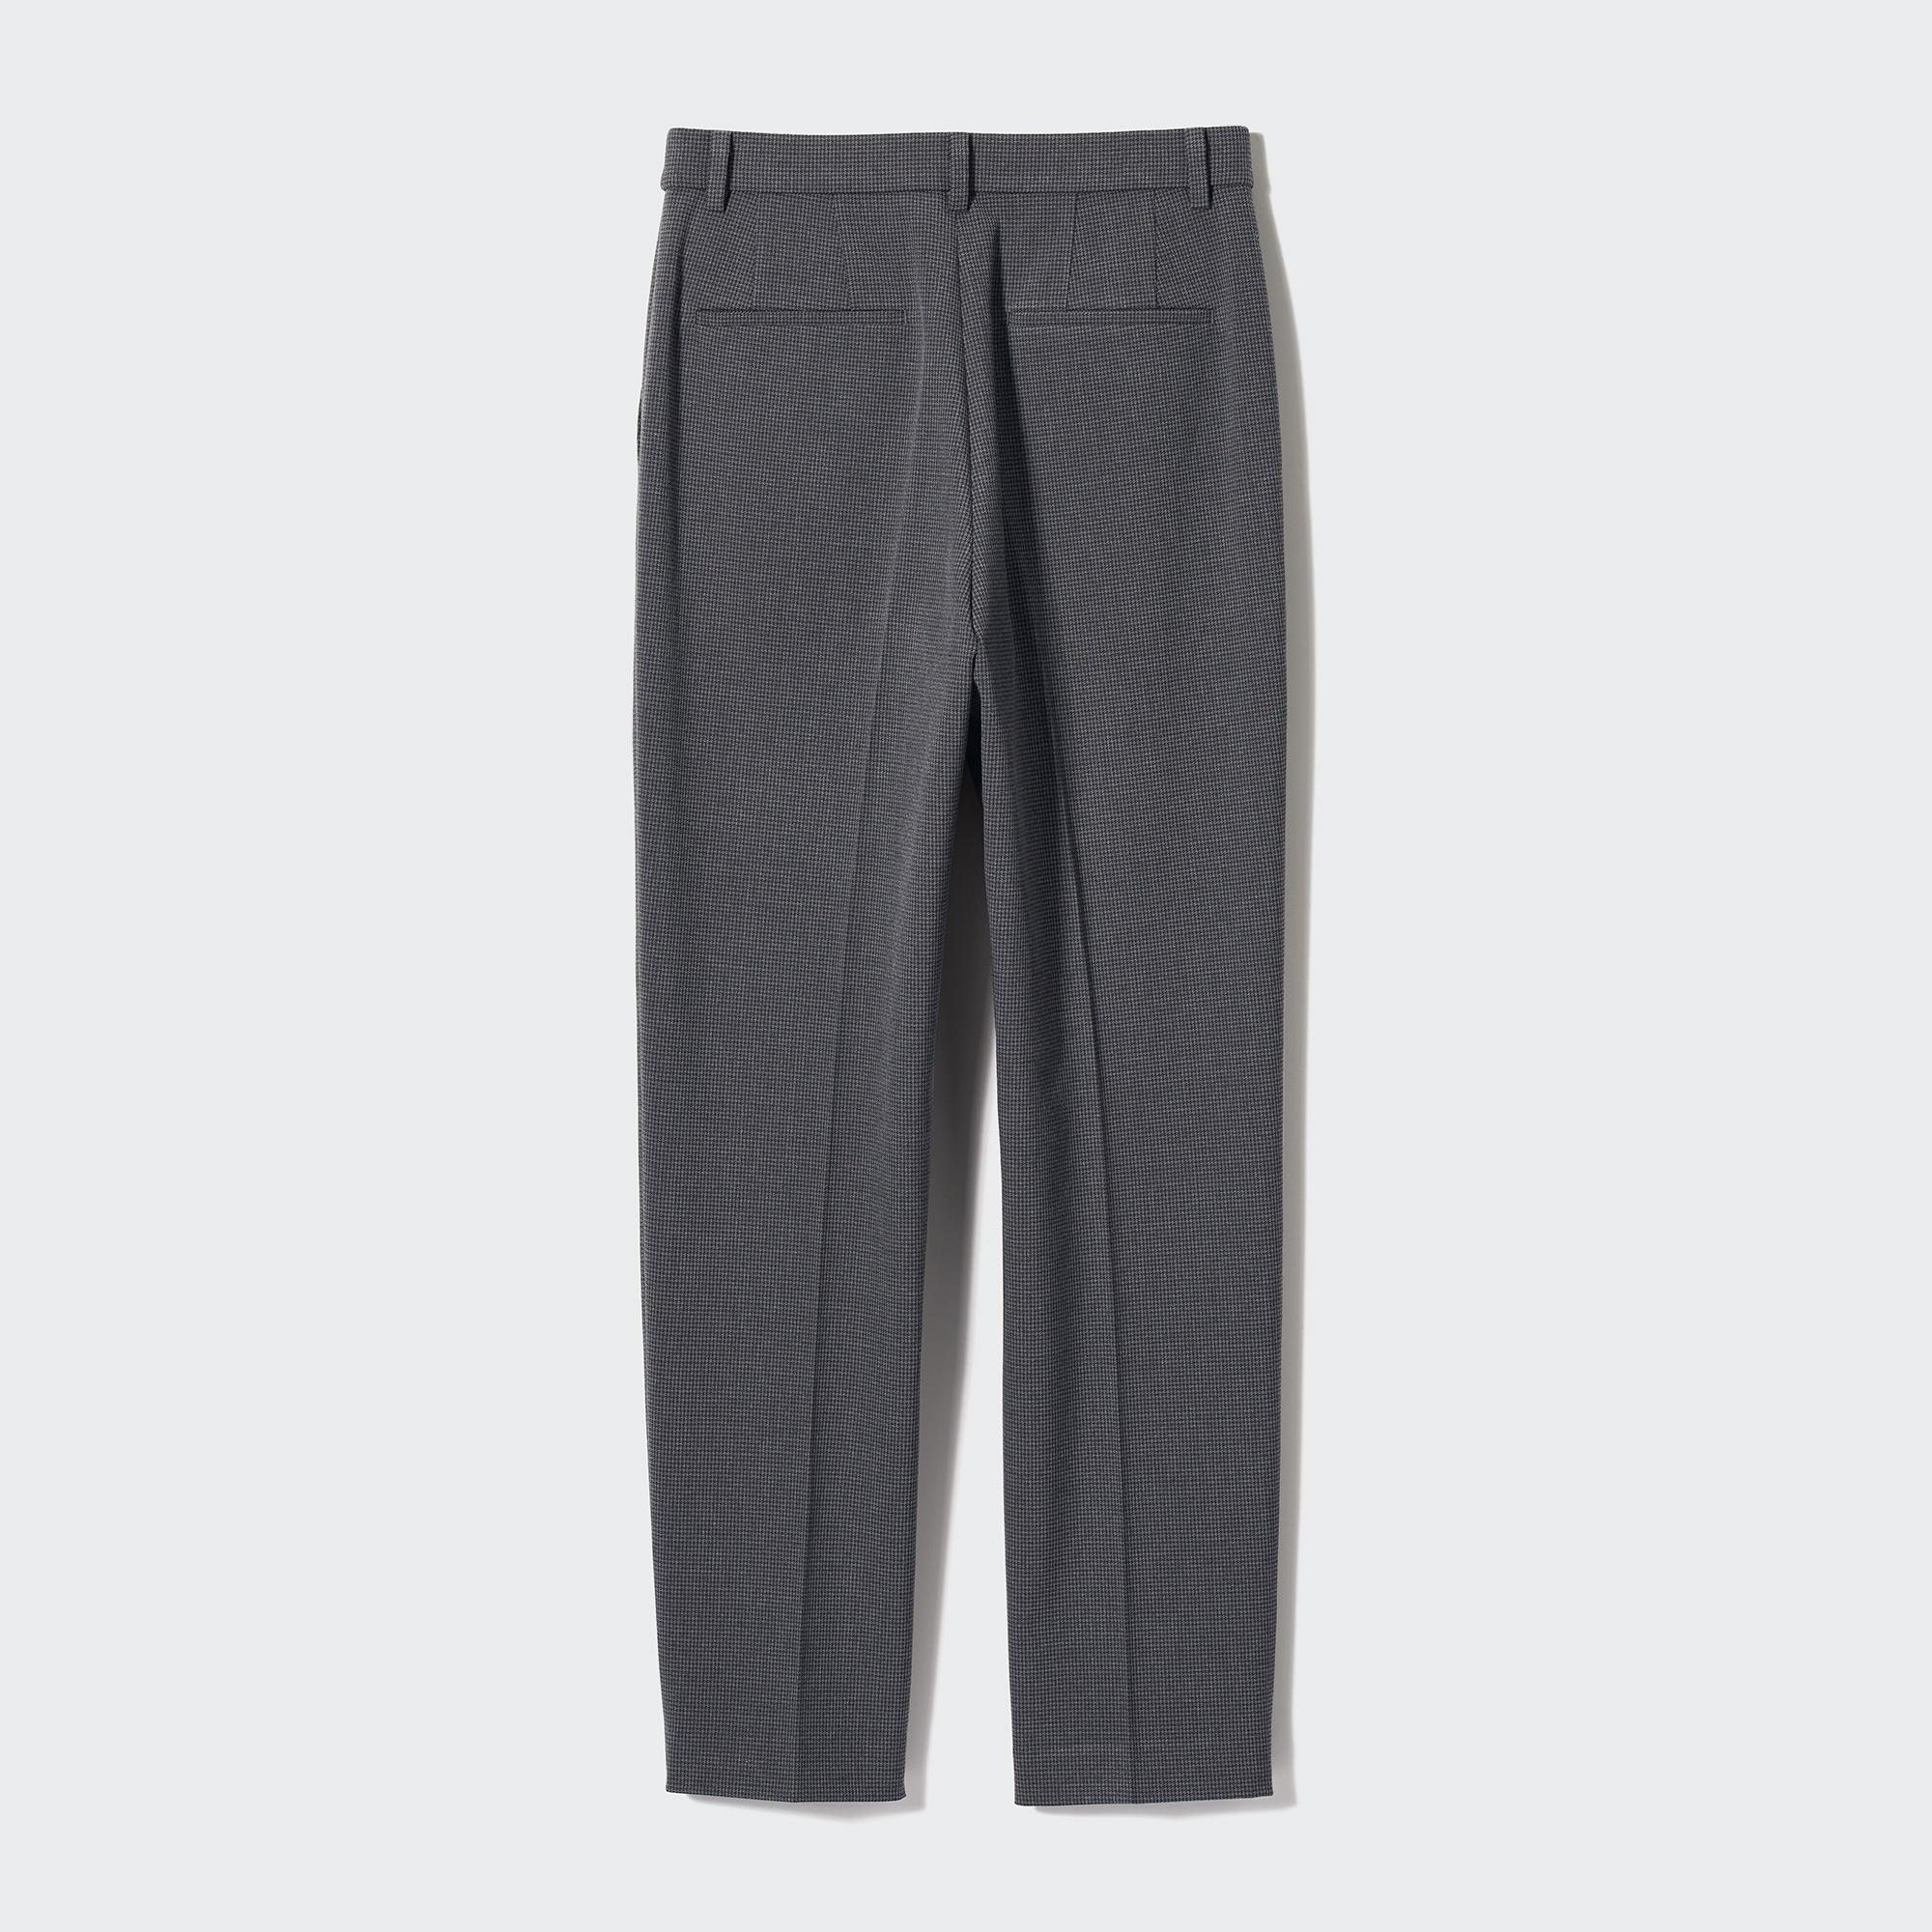 Smart Ankle Pants (2-Way Stretch, Checked, Tall)